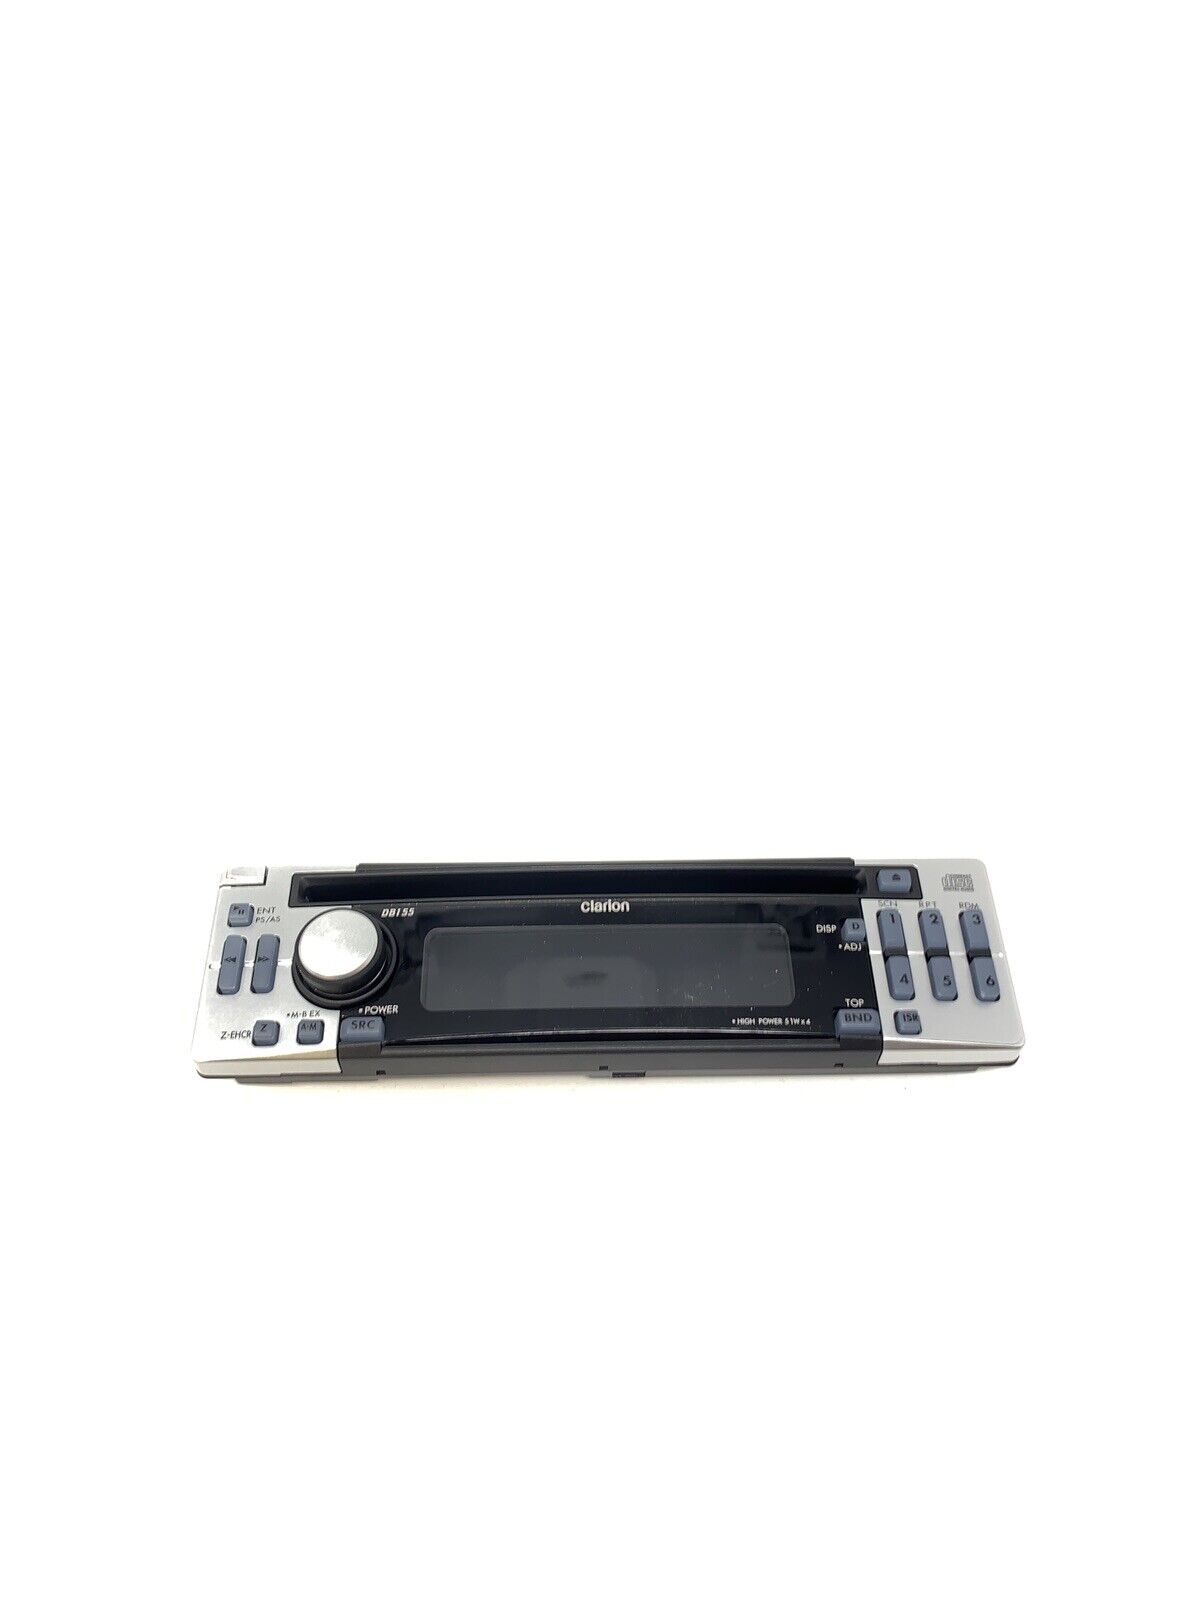 Clarion Db155 Oem Genuine Car Stereo Faceplate Only